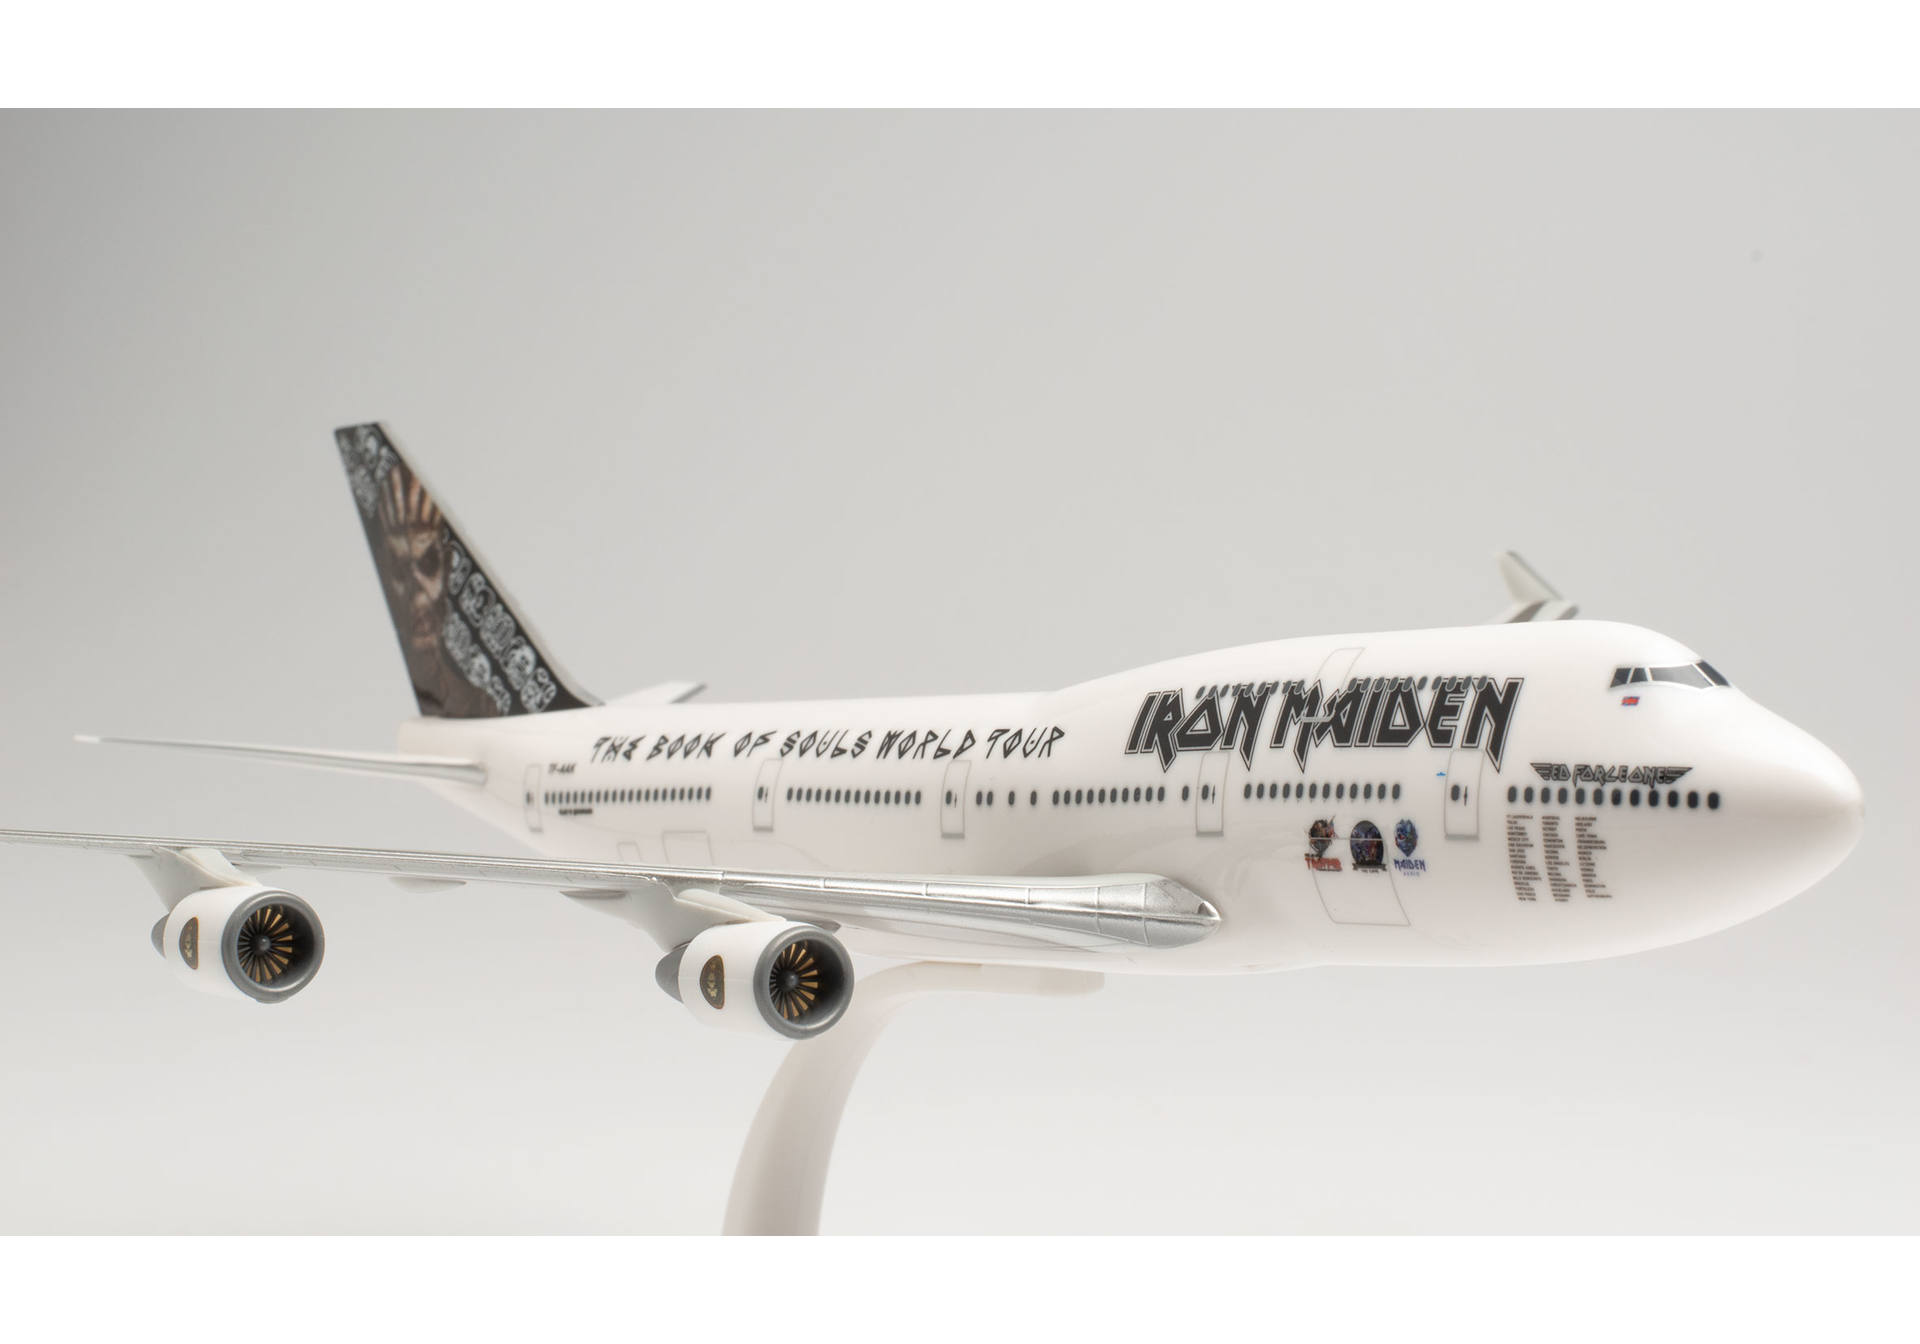 Iron Maiden (Air Atlanta Icelandic) Boeing 747-400 “Ed Force One” - The Book of Souls World Tour 2016 – TF-AAK